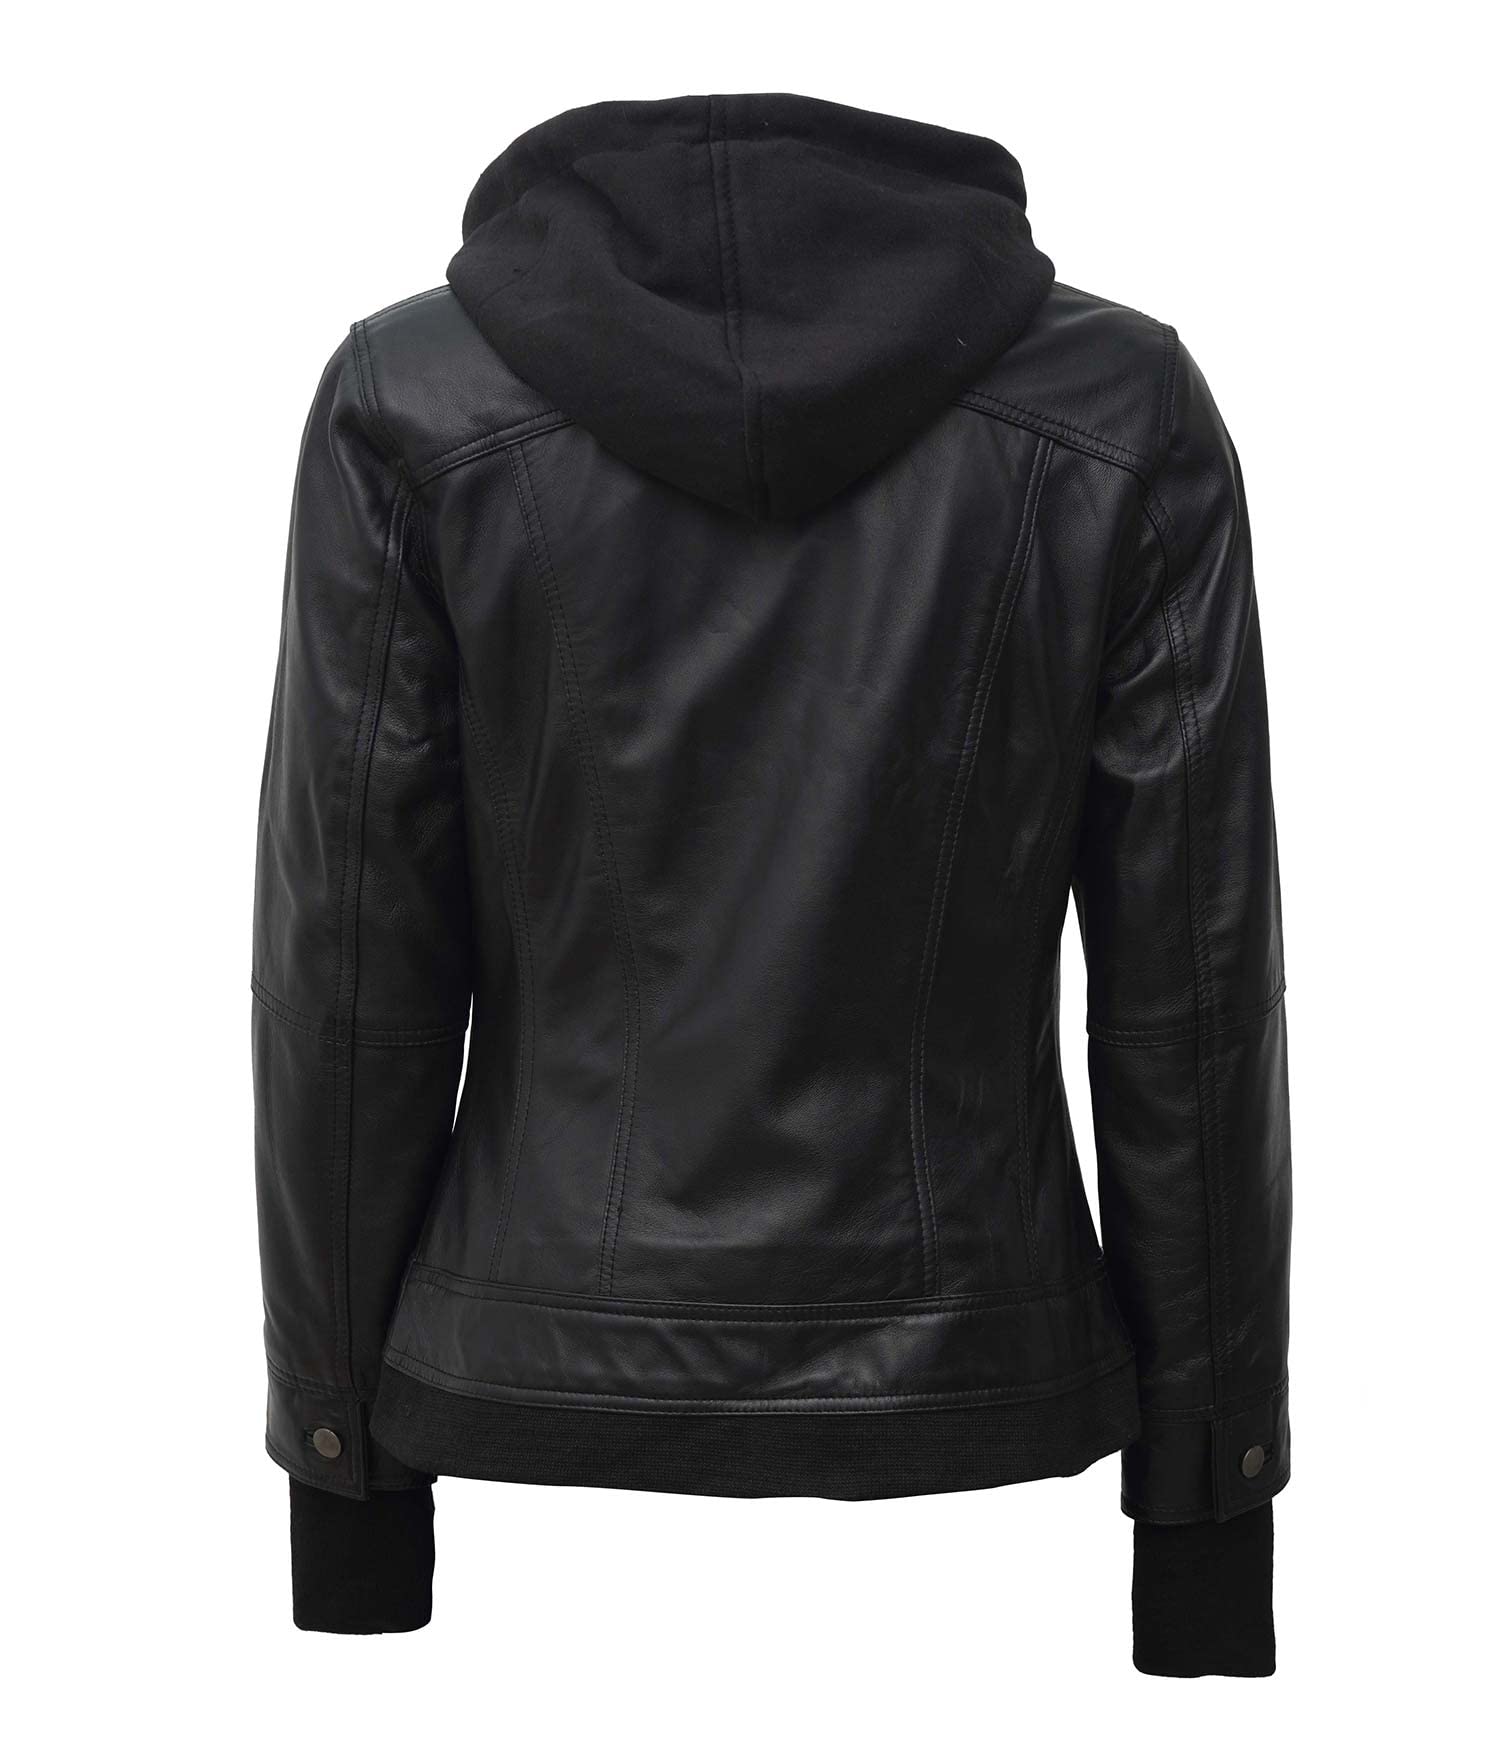 Decrum Hooded Leather Jacket Women - 100% Real Lambskin Black And Brown Womens Leather Jackets with Removable Hood